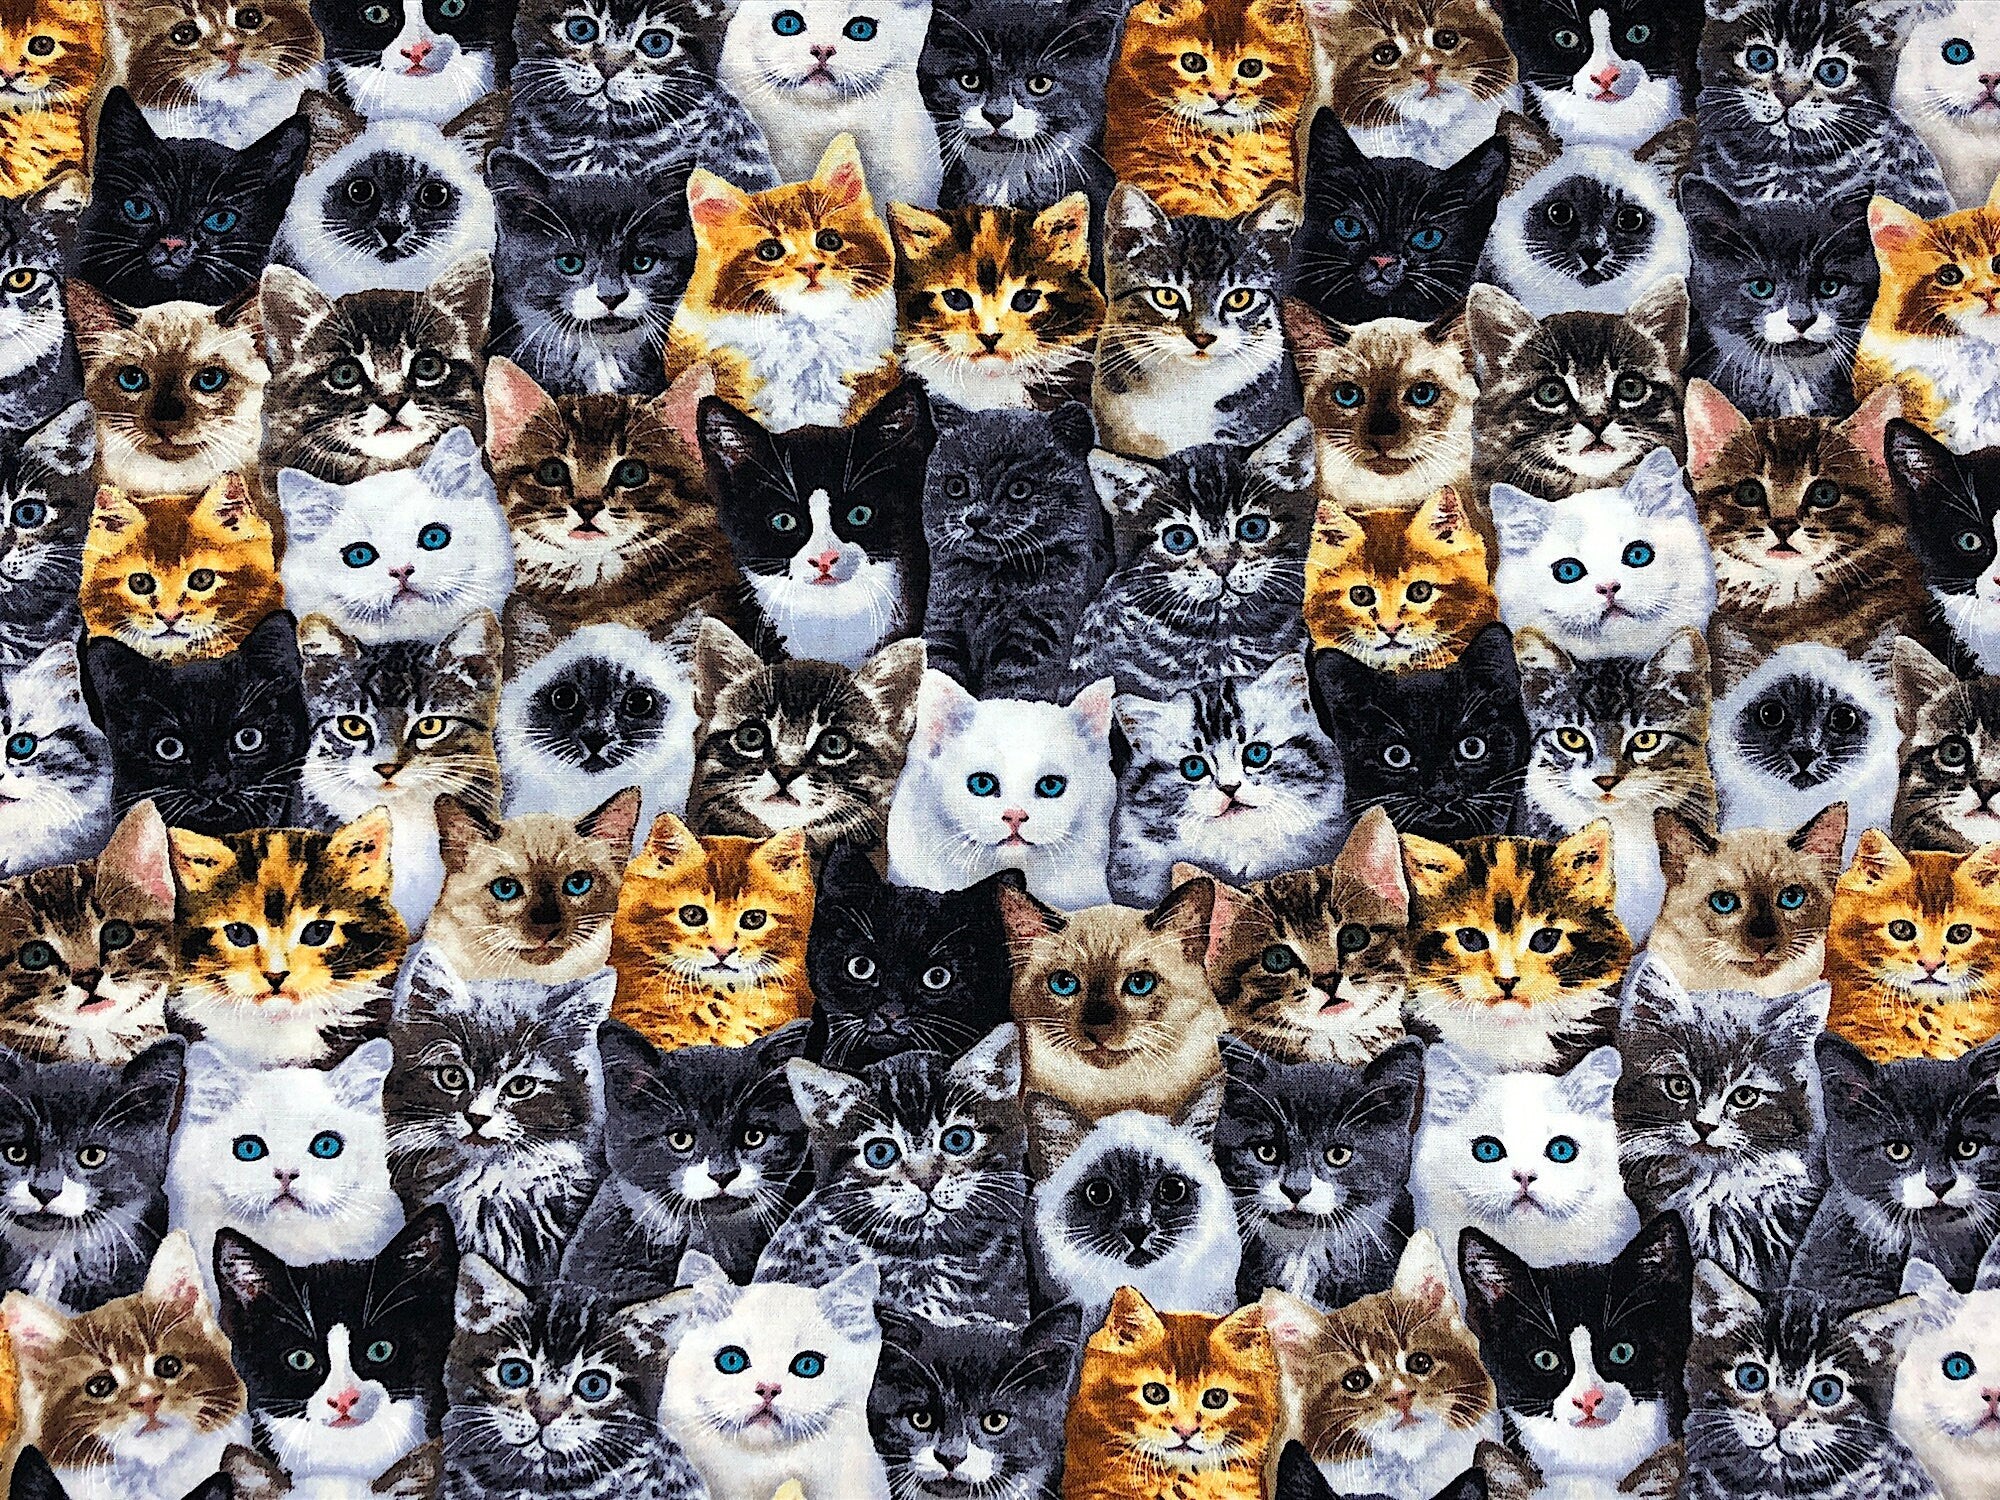 This fabric is called Packed Mixed Breeds of Cats and is covered with white, black, brown and orange cats